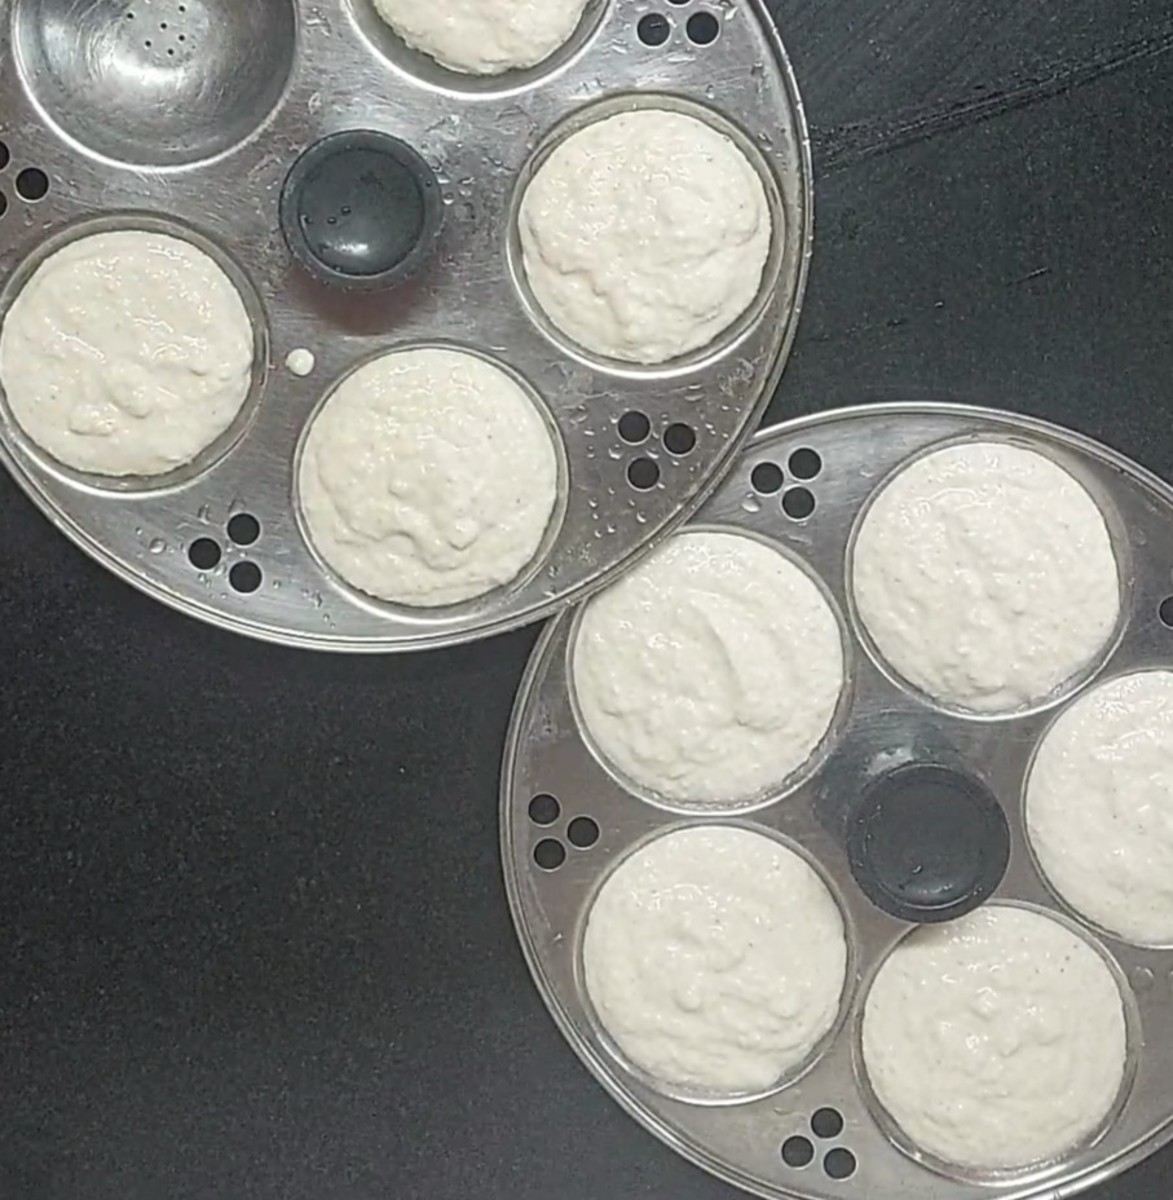 Add batter to the idli moulds, pat once.